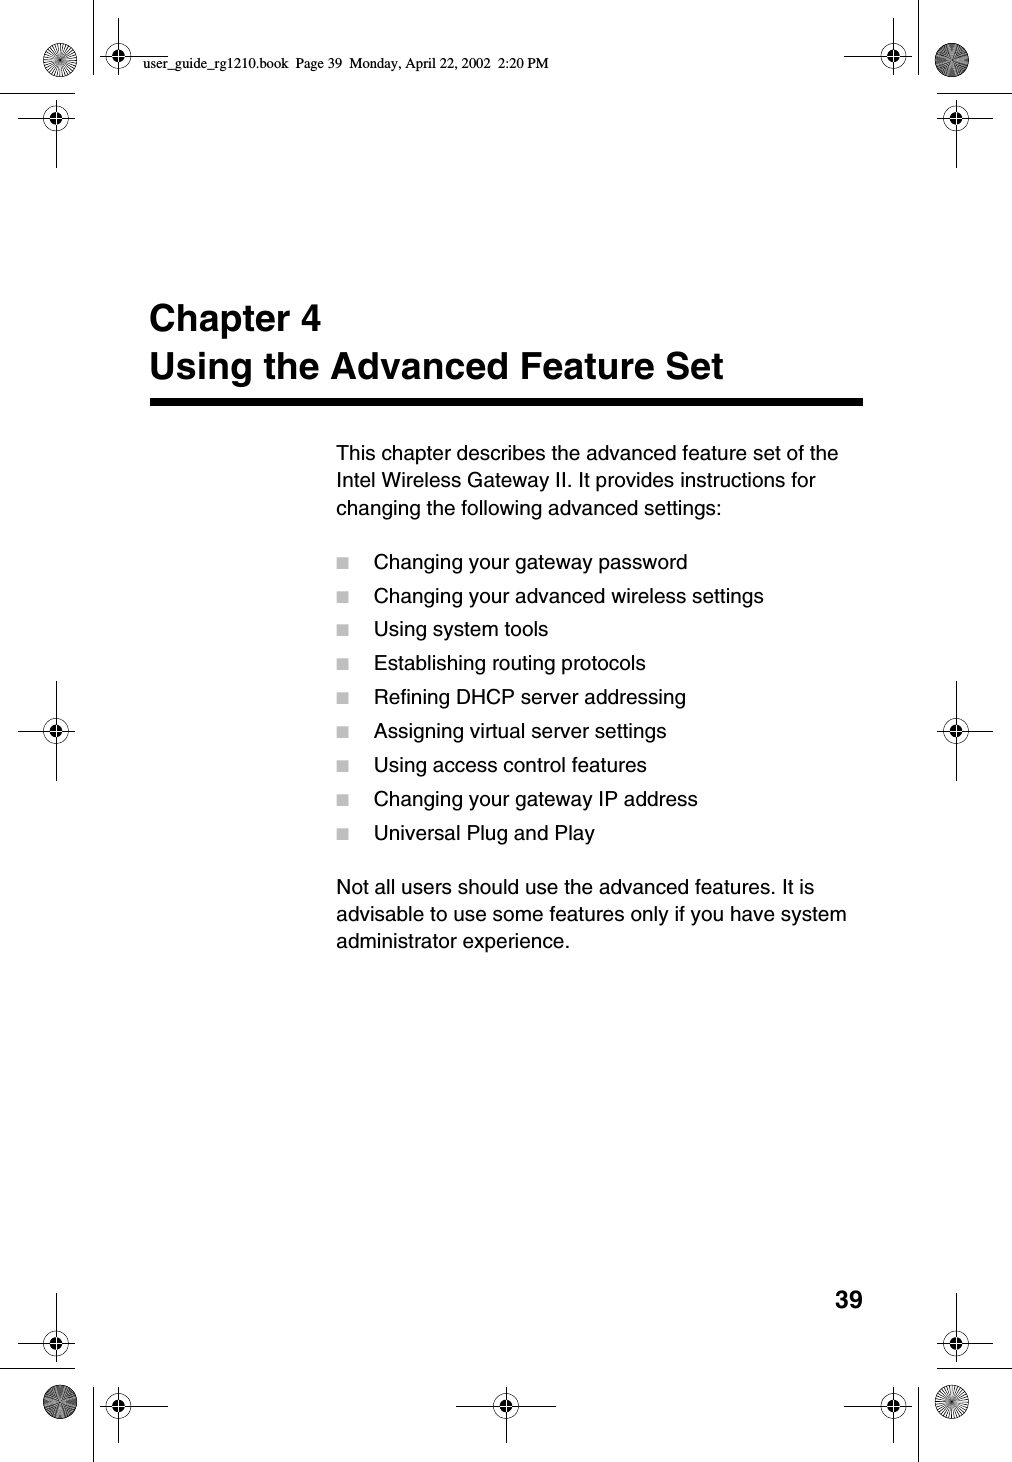 39Chapter 4Using the Advanced Feature SetThis chapter describes the advanced feature set of theIntel Wireless Gateway II. It provides instructions forchanging the following advanced settings:■Changing your gateway password■Changing your advanced wireless settings■Using system tools■Establishing routing protocols■Refining DHCP server addressing■Assigning virtual server settings■Using access control features■Changing your gateway IP address■Universal Plug and PlayNot all users should use the advanced features. It isadvisable to use some features only if you have systemadministrator experience.user_guide_rg1210.book Page 39 Monday, April 22, 2002 2:20 PM